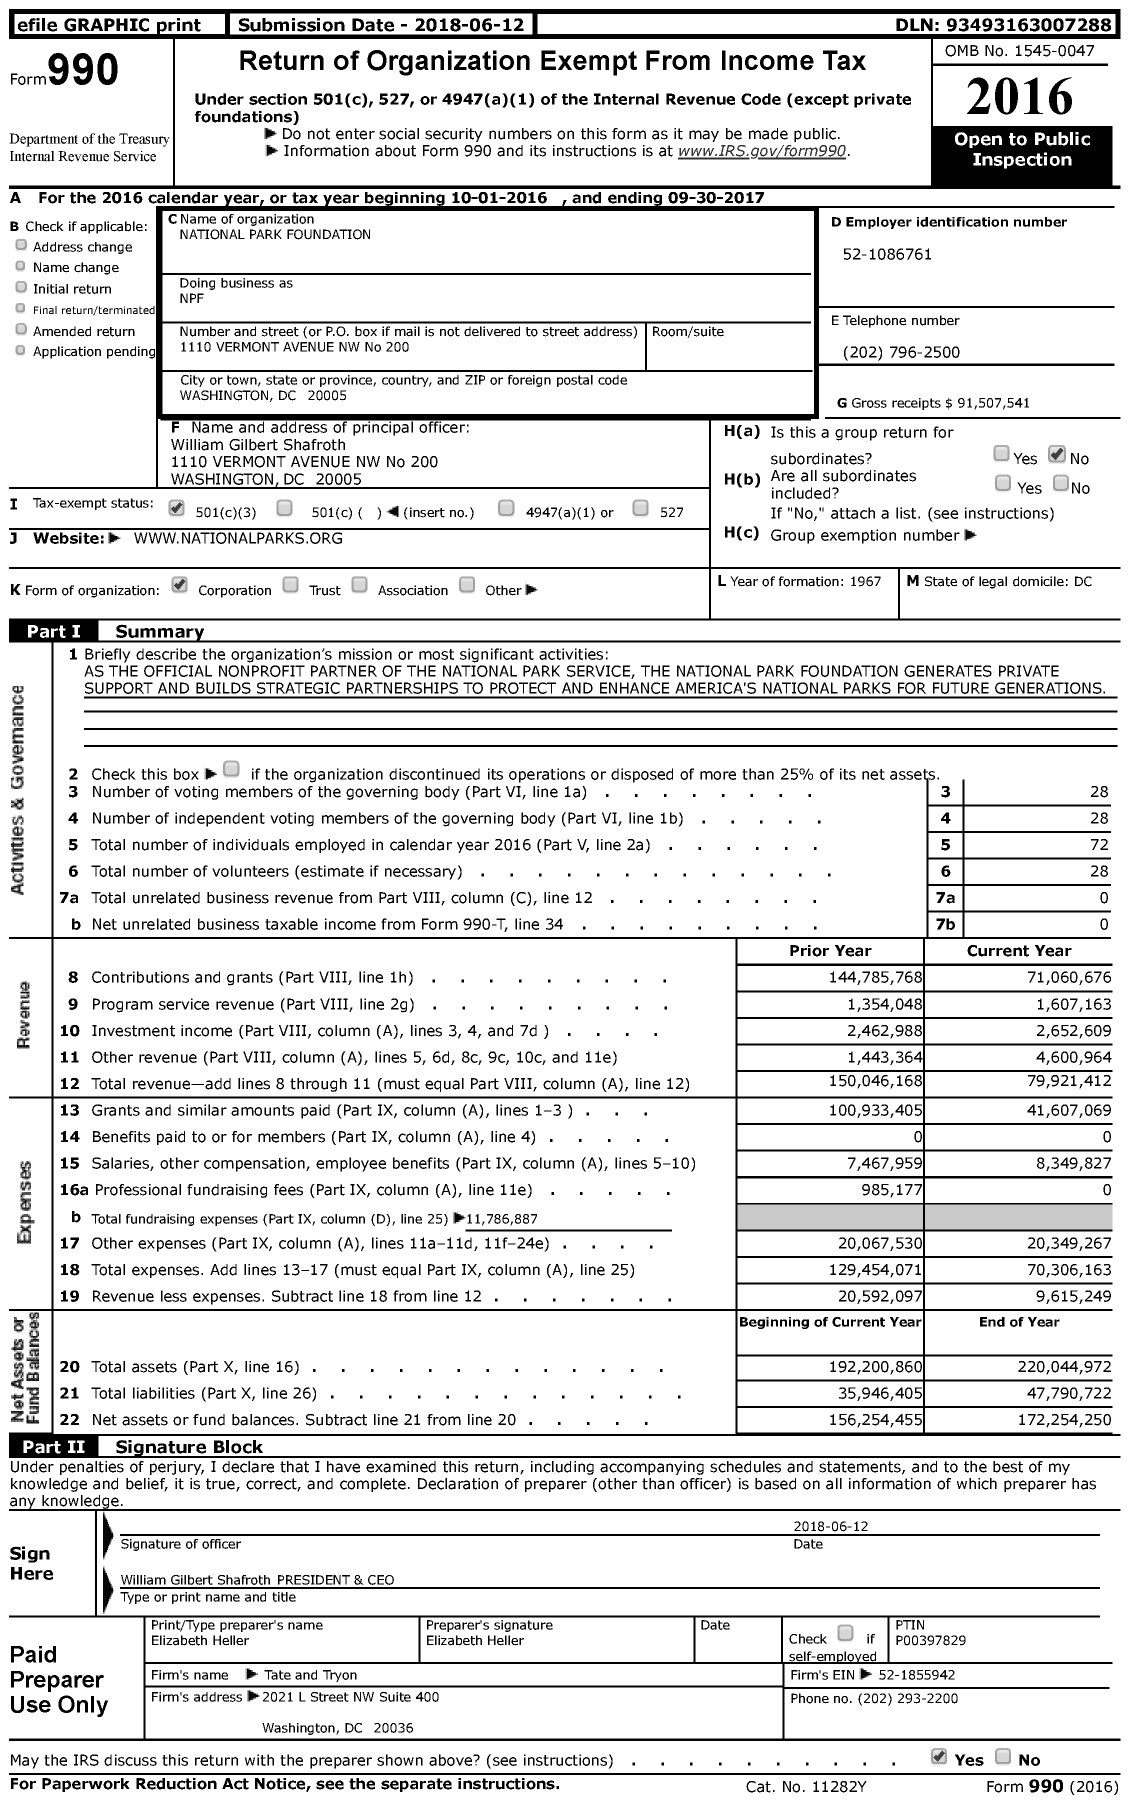 Image of first page of 2016 Form 990 for National Park Foundation (NPF)